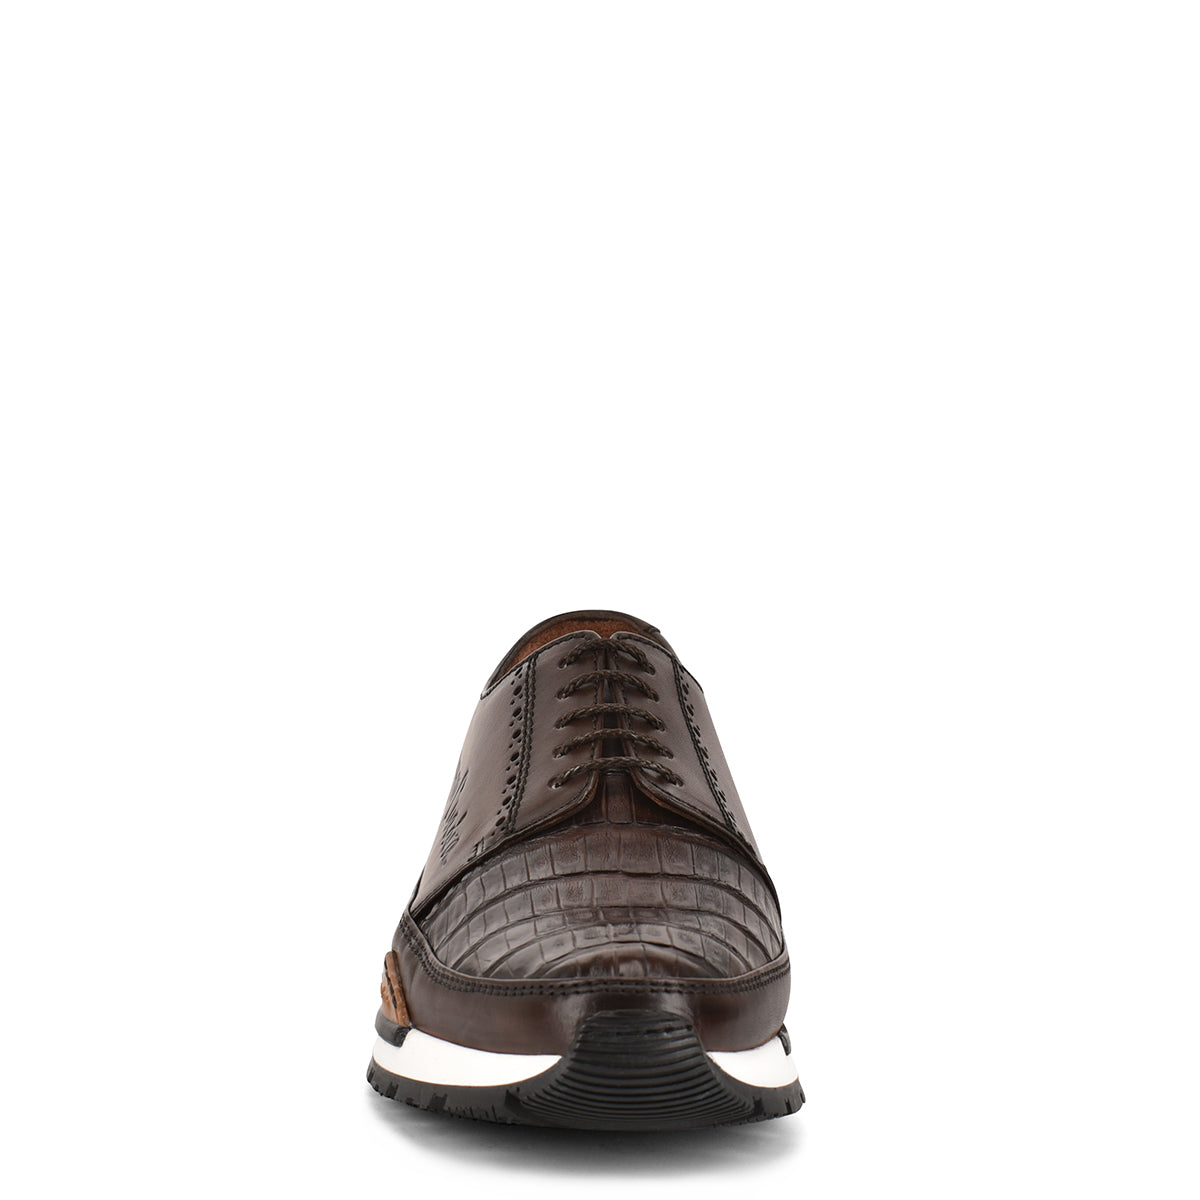 Hand-painted brown exotic leather sneakers